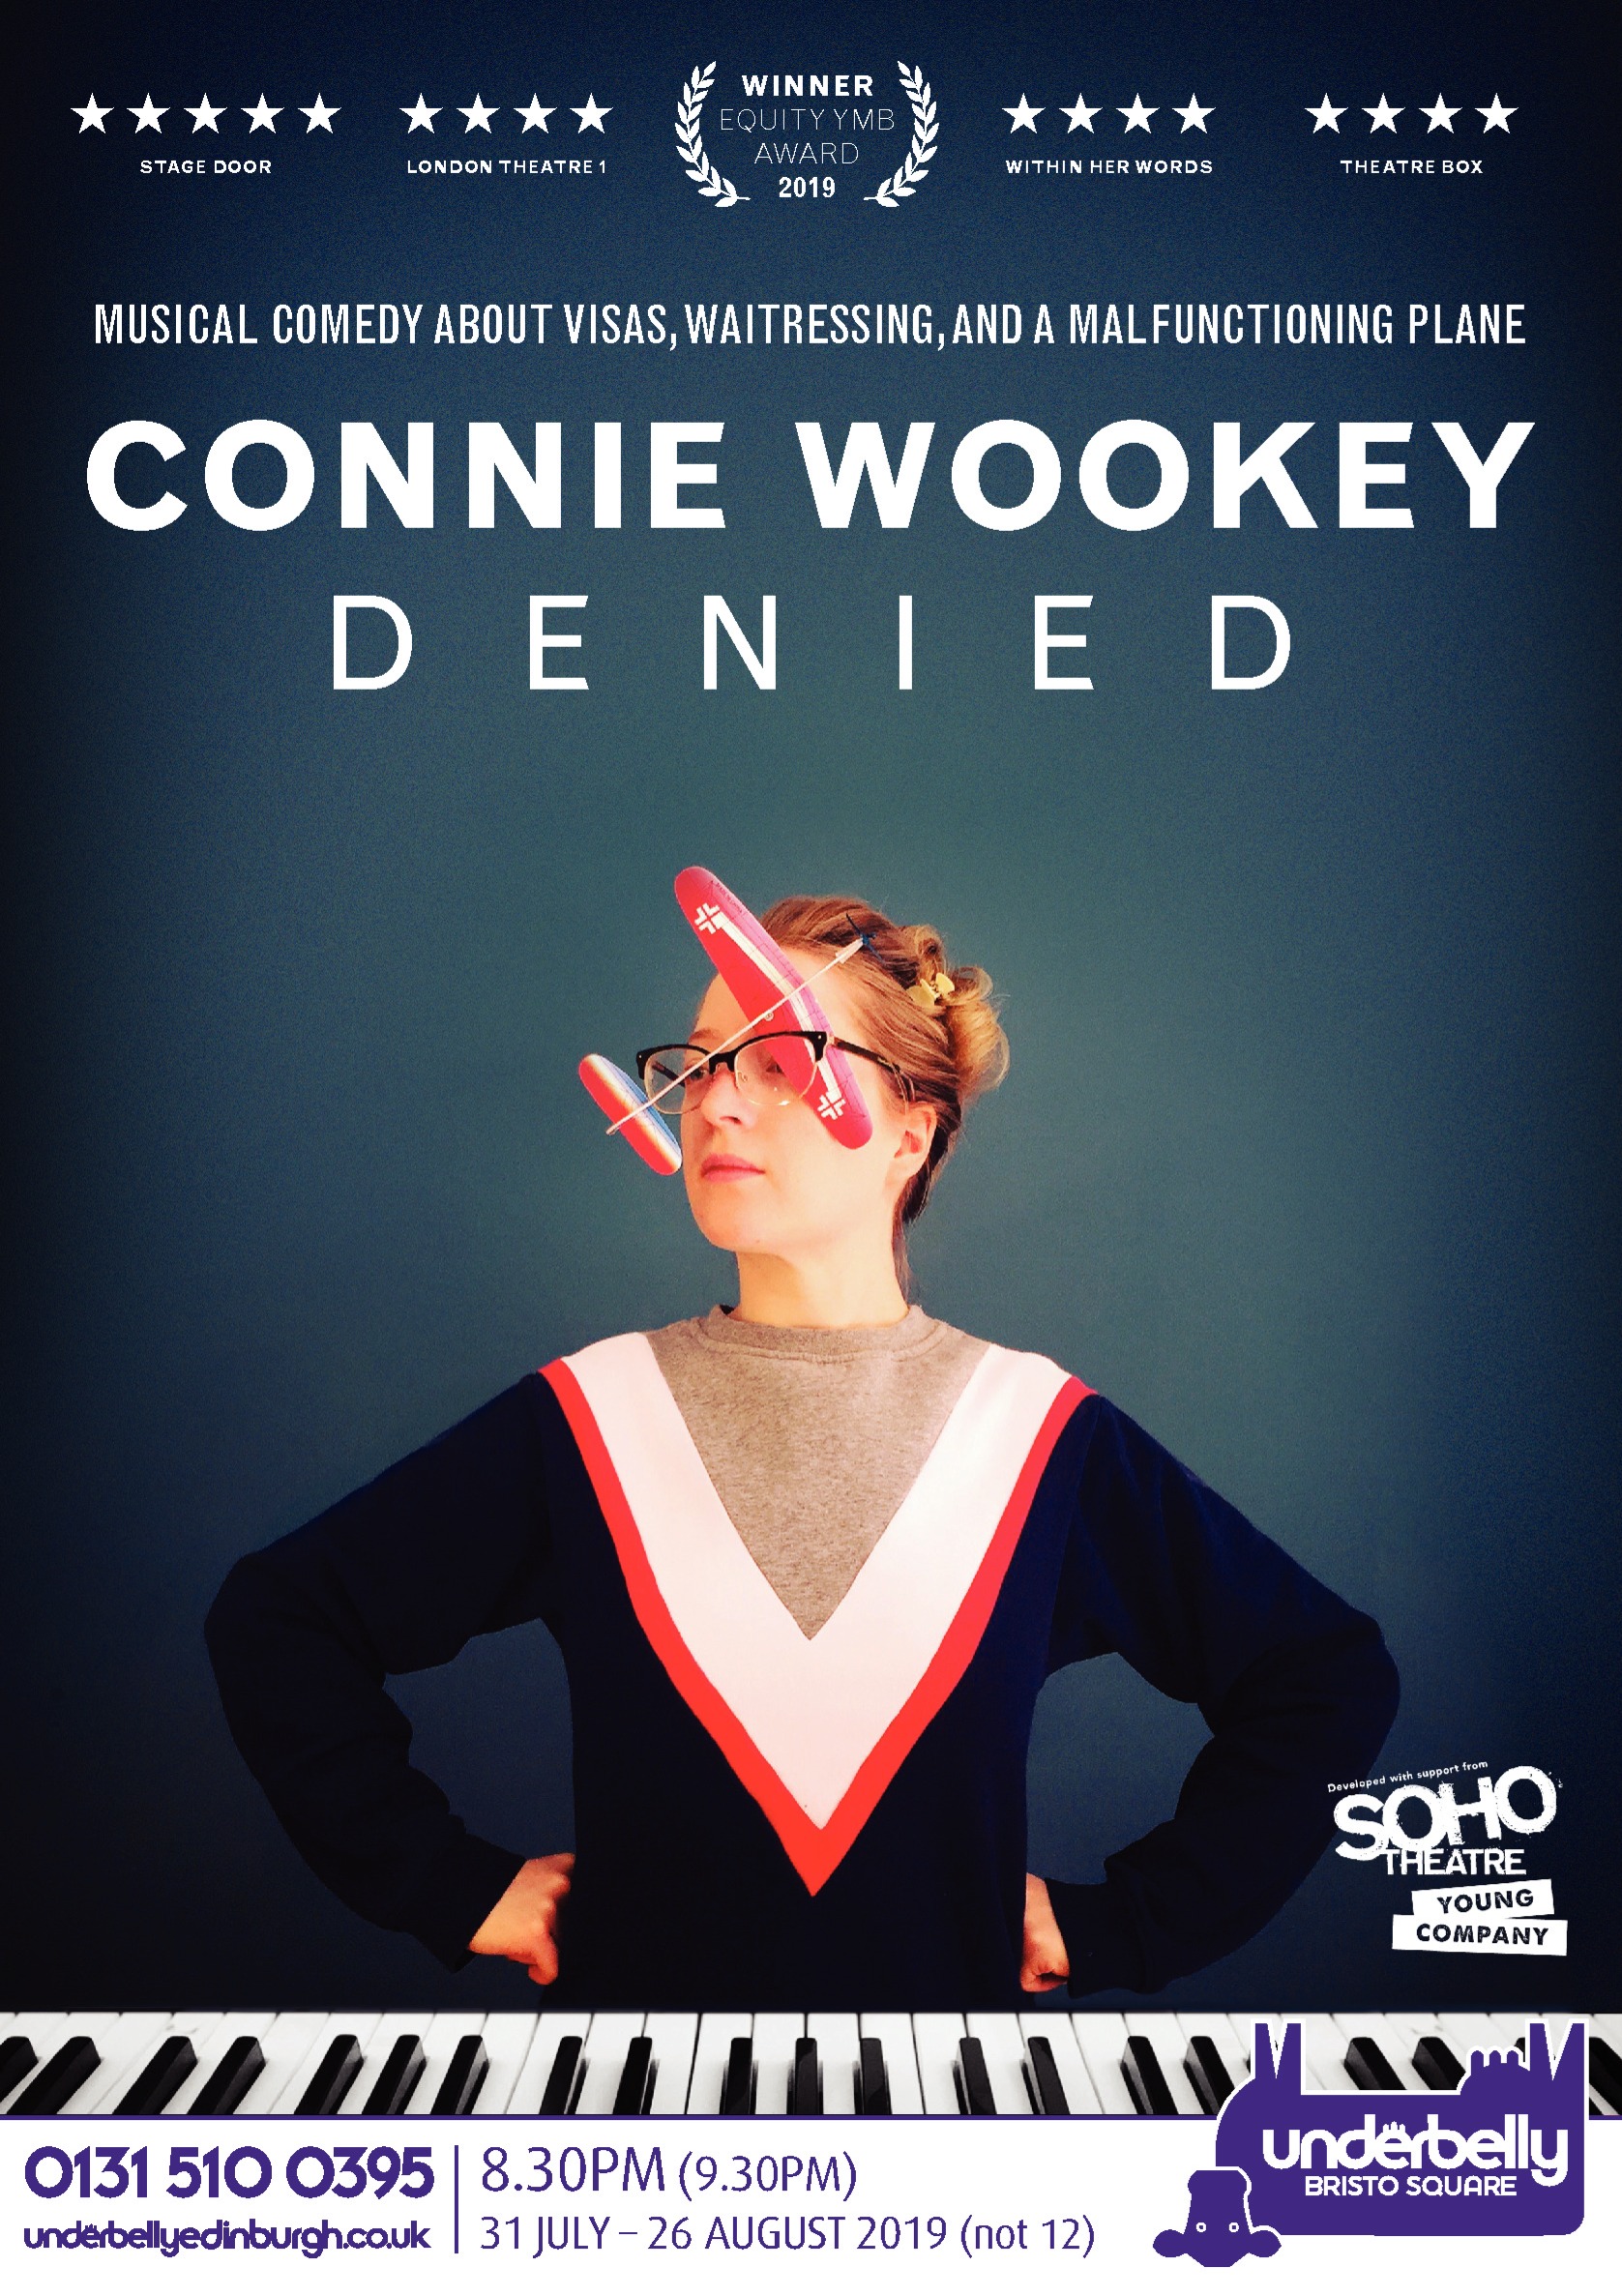 The poster for Connie Wookey: Denied